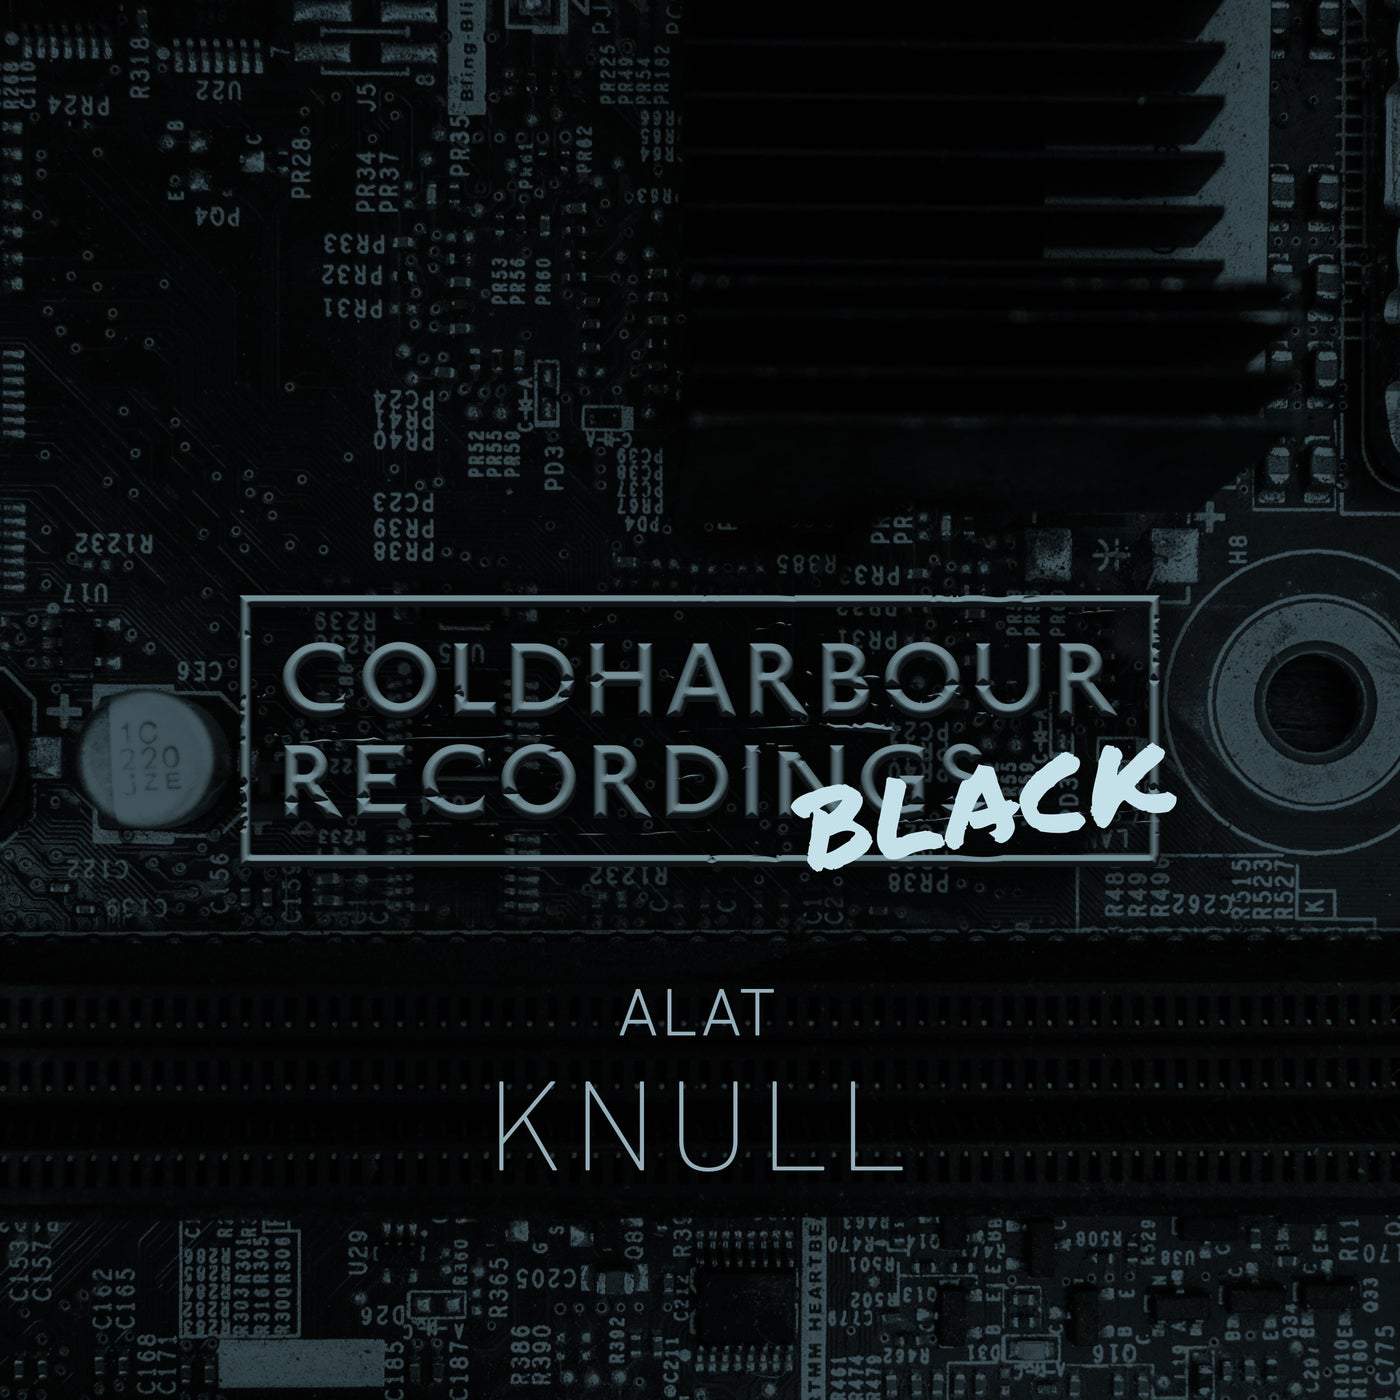 image cover: Alat - Knull on Coldharbour Black